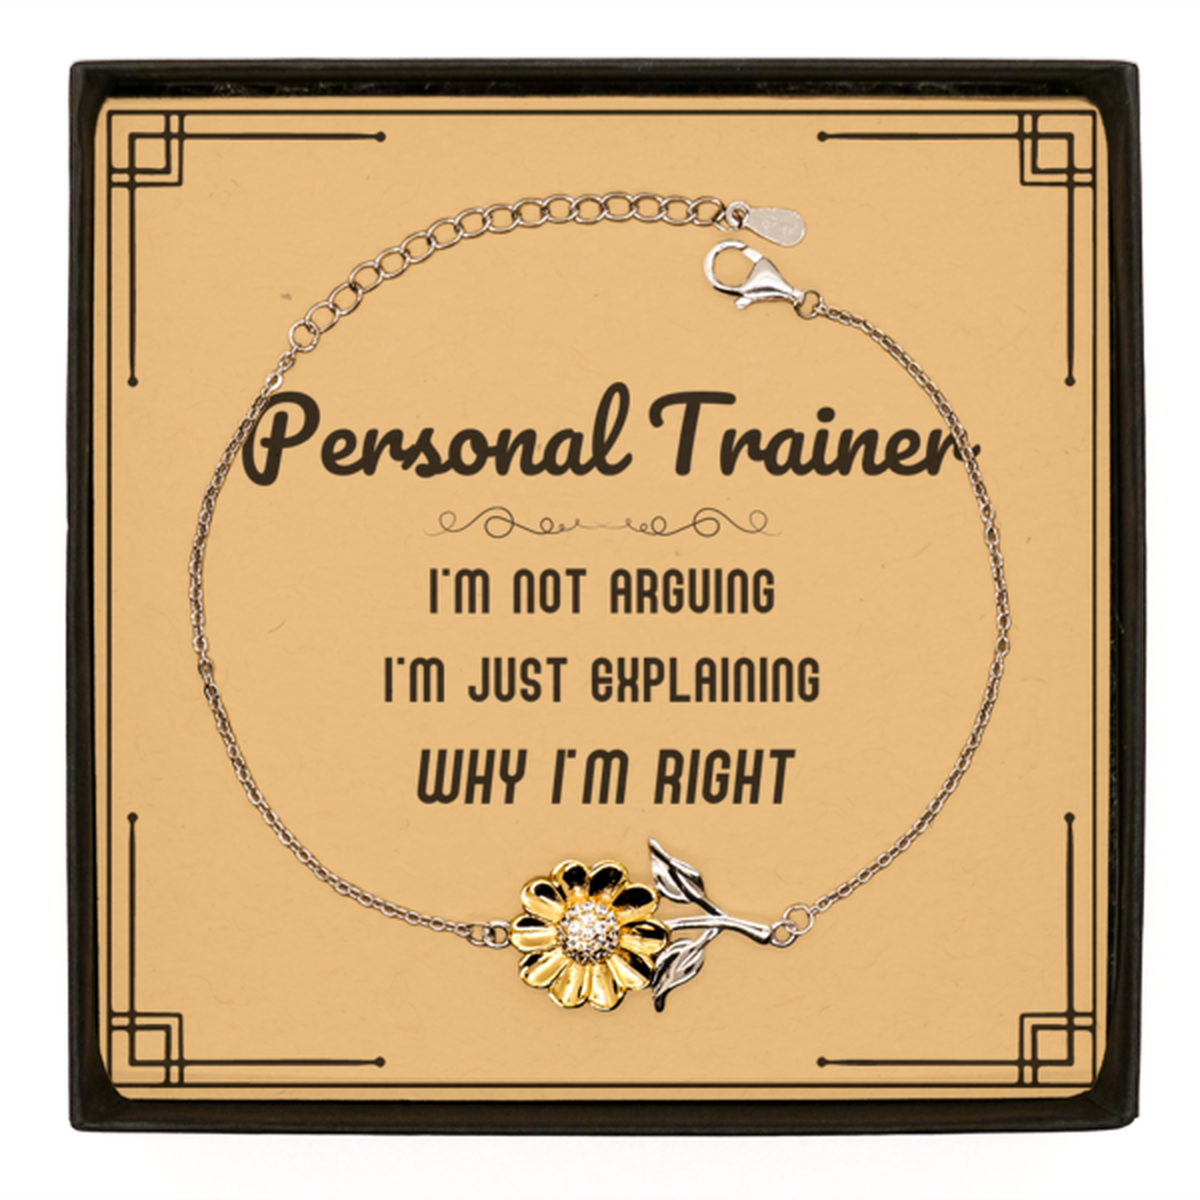 Personal Trainer I'm not Arguing. I'm Just Explaining Why I'm RIGHT Sunflower Bracelet, Funny Saying Quote Personal Trainer Gifts For Personal Trainer Message Card Graduation Birthday Christmas Gifts for Men Women Coworker